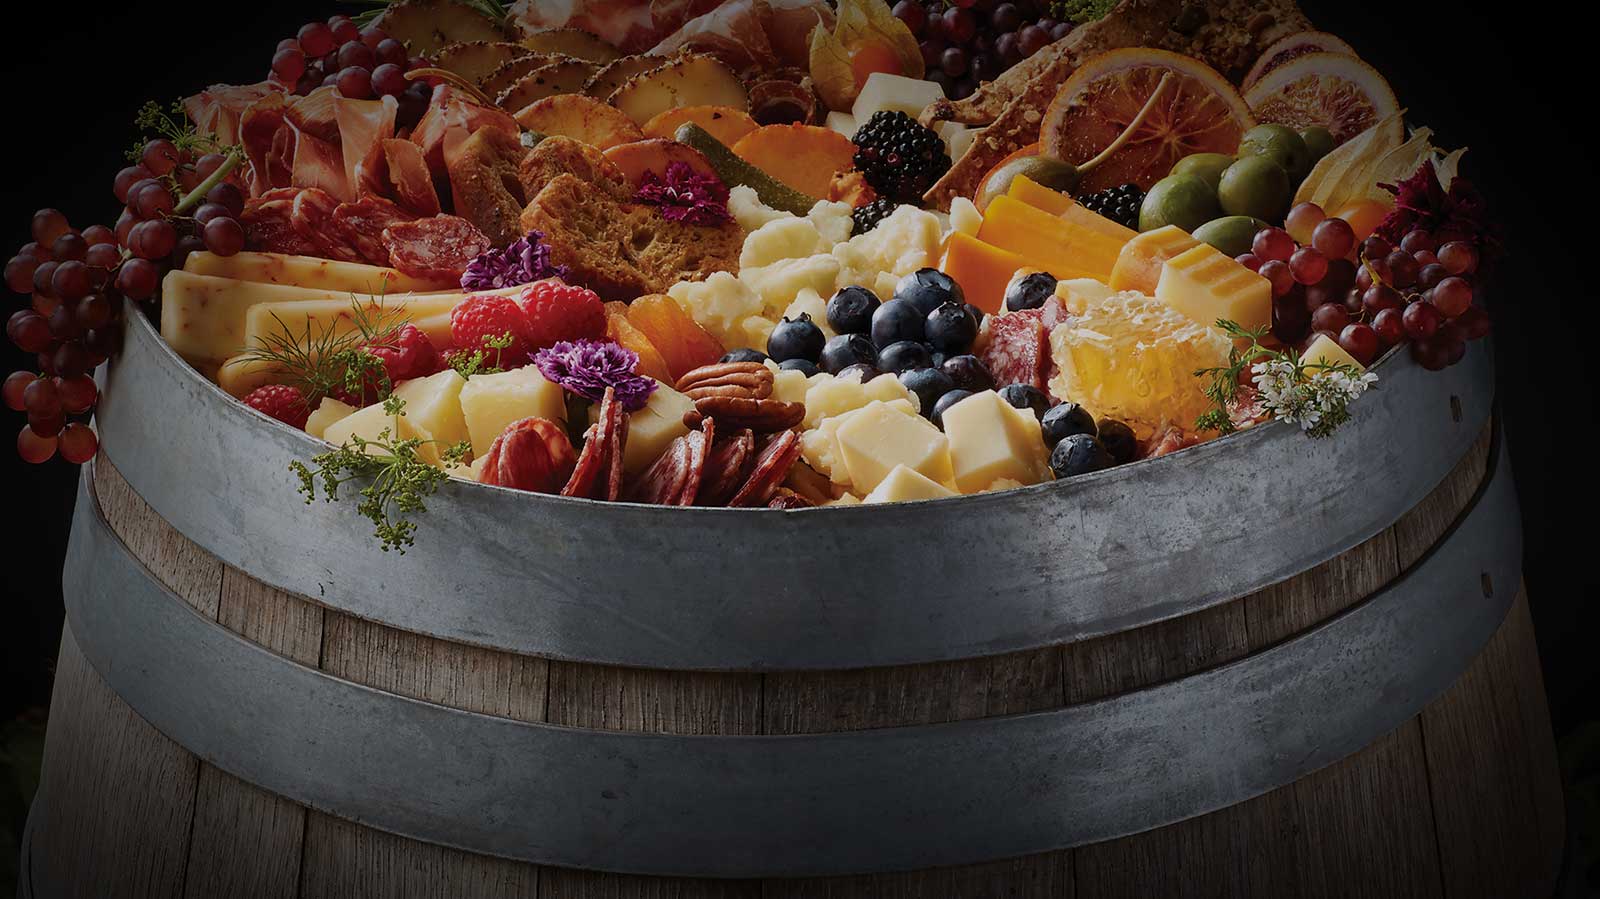 A wooden barrel topped with an assortment of cheeses, meats, fruits and breads.